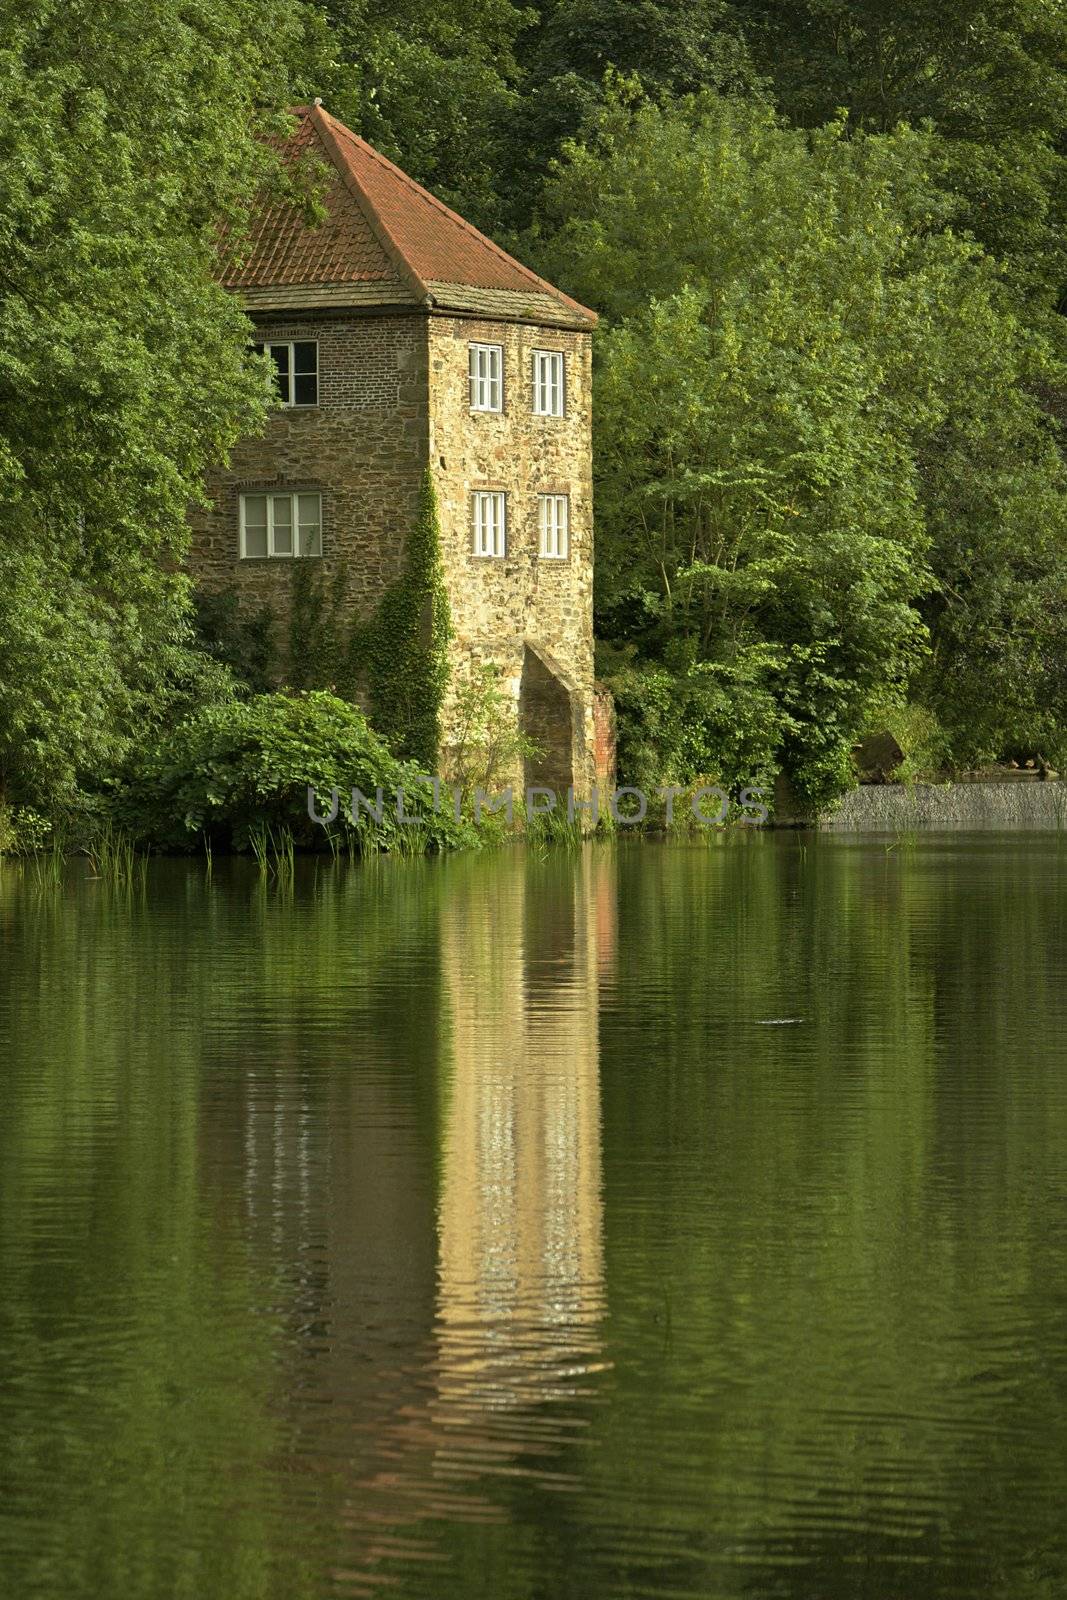 Historic old Pump House on River Banks by instinia